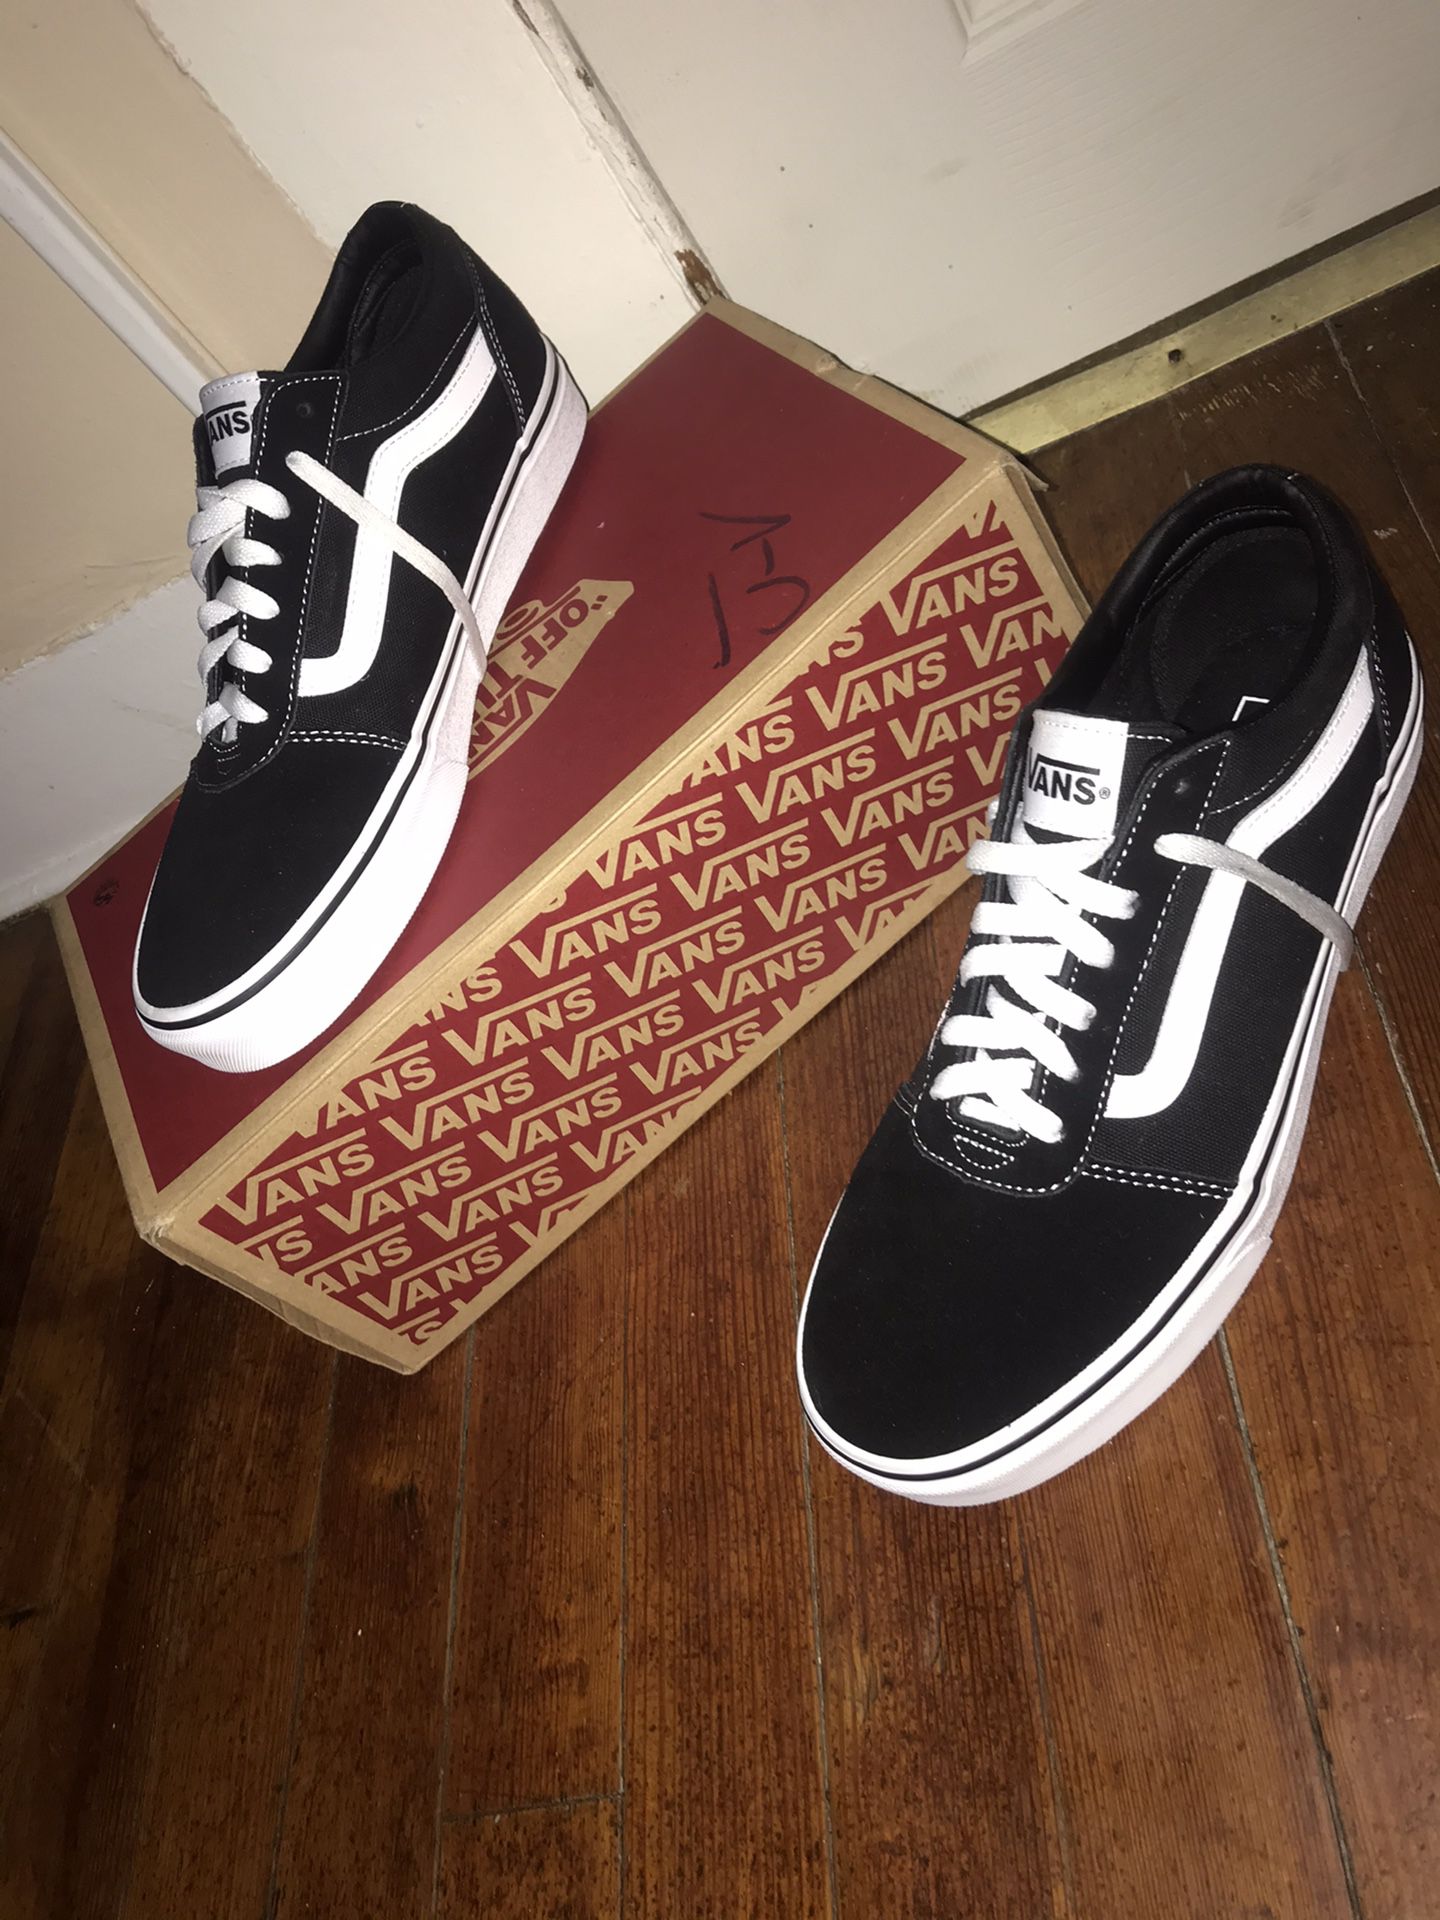 No trades❗️❗️ Old Skool Vans Size 9.5. Brand new ❗️40 $ lowest 30$